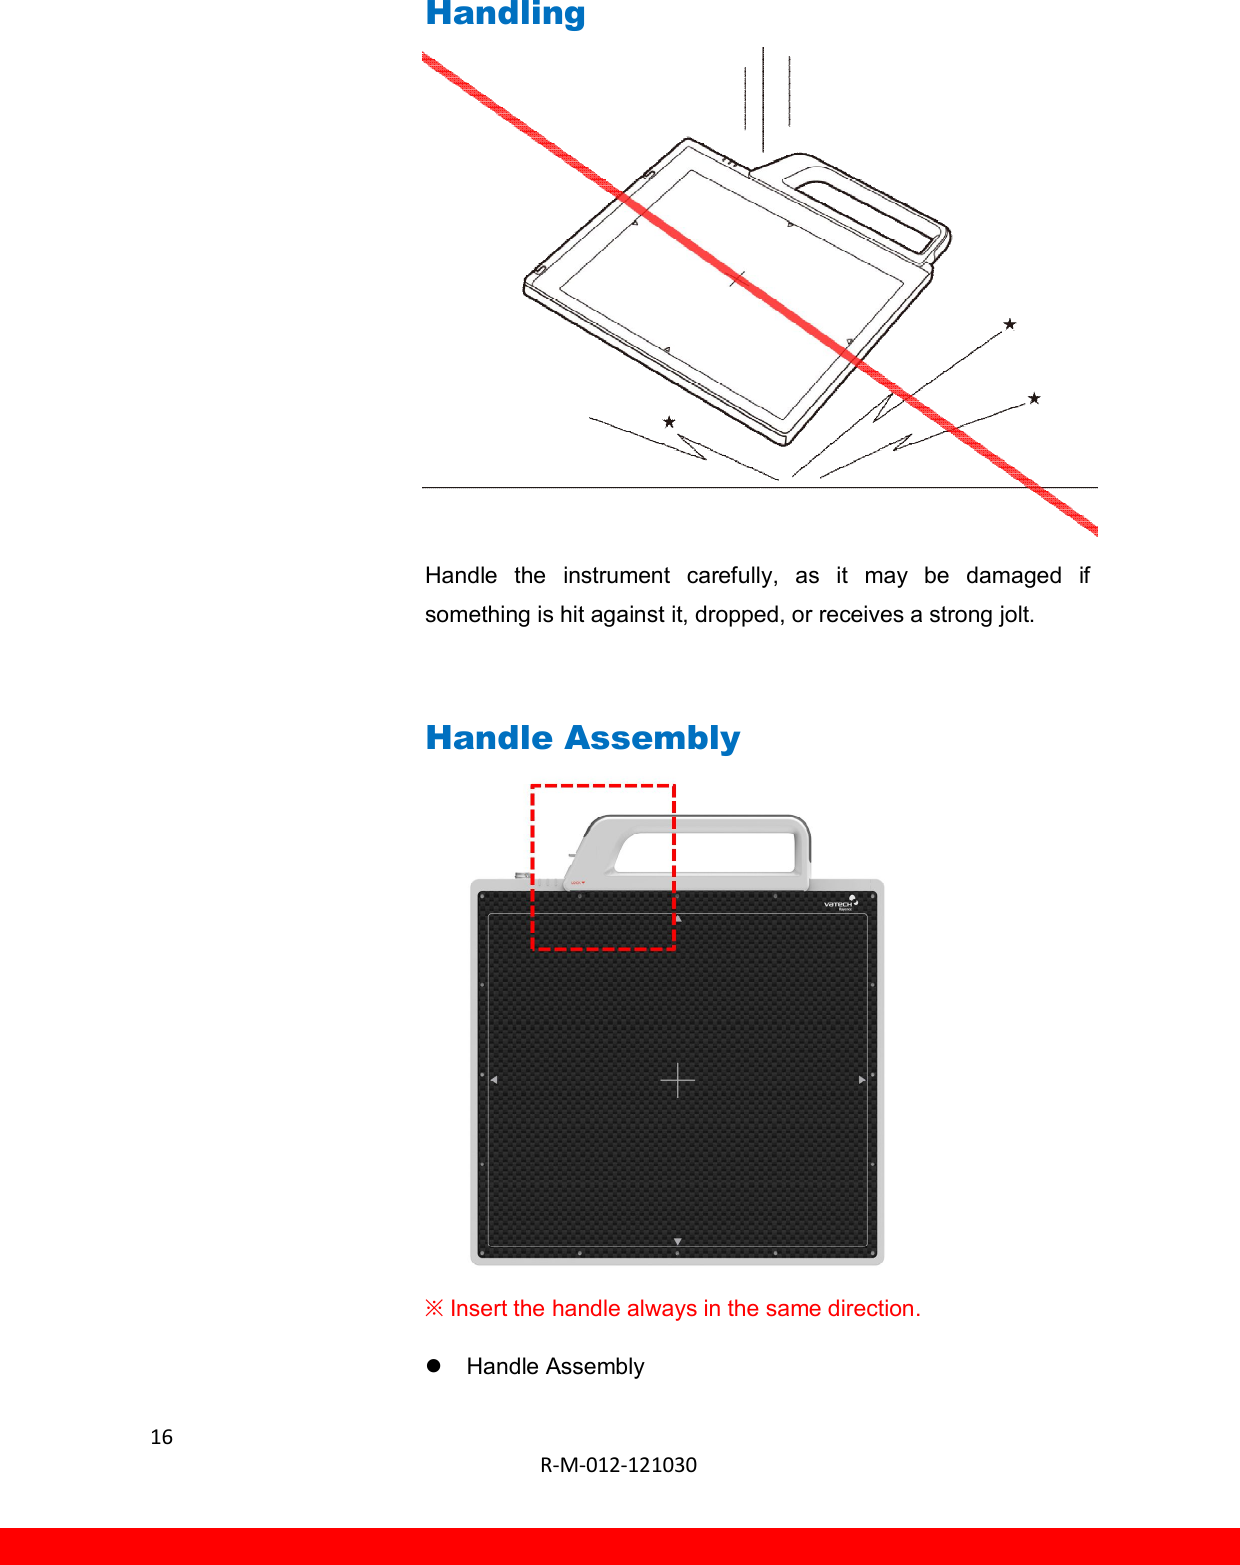  16  R-M-012-121030      Handling          Handle  the  instrument  carefully,  as  it  may  be  damaged  if something is hit against it, dropped, or receives a strong jolt.  Handle Assembly          ※ Insert the handle always in the same direction.   Handle Assembly 